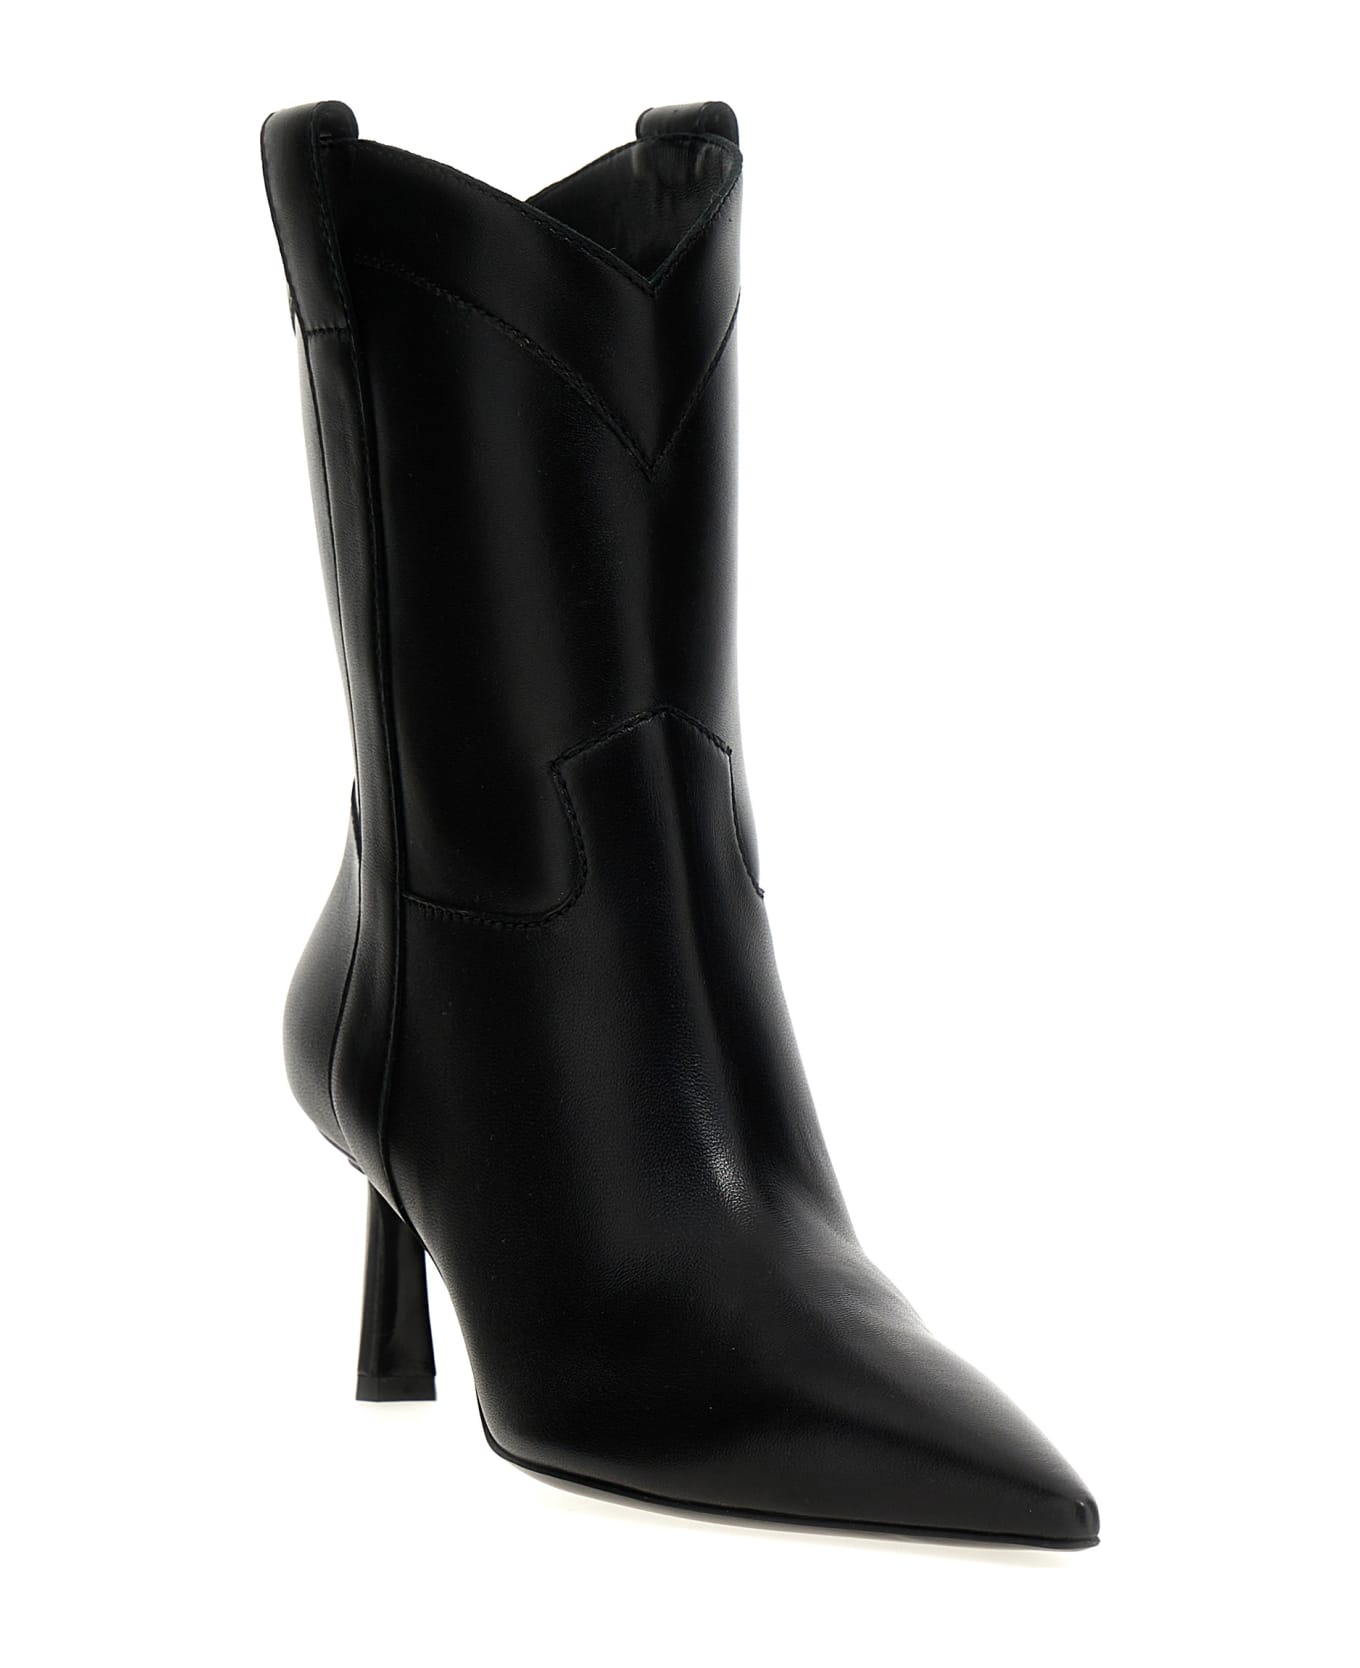 Sergio Rossi 'guadalupe' Ankle Boots - Black  